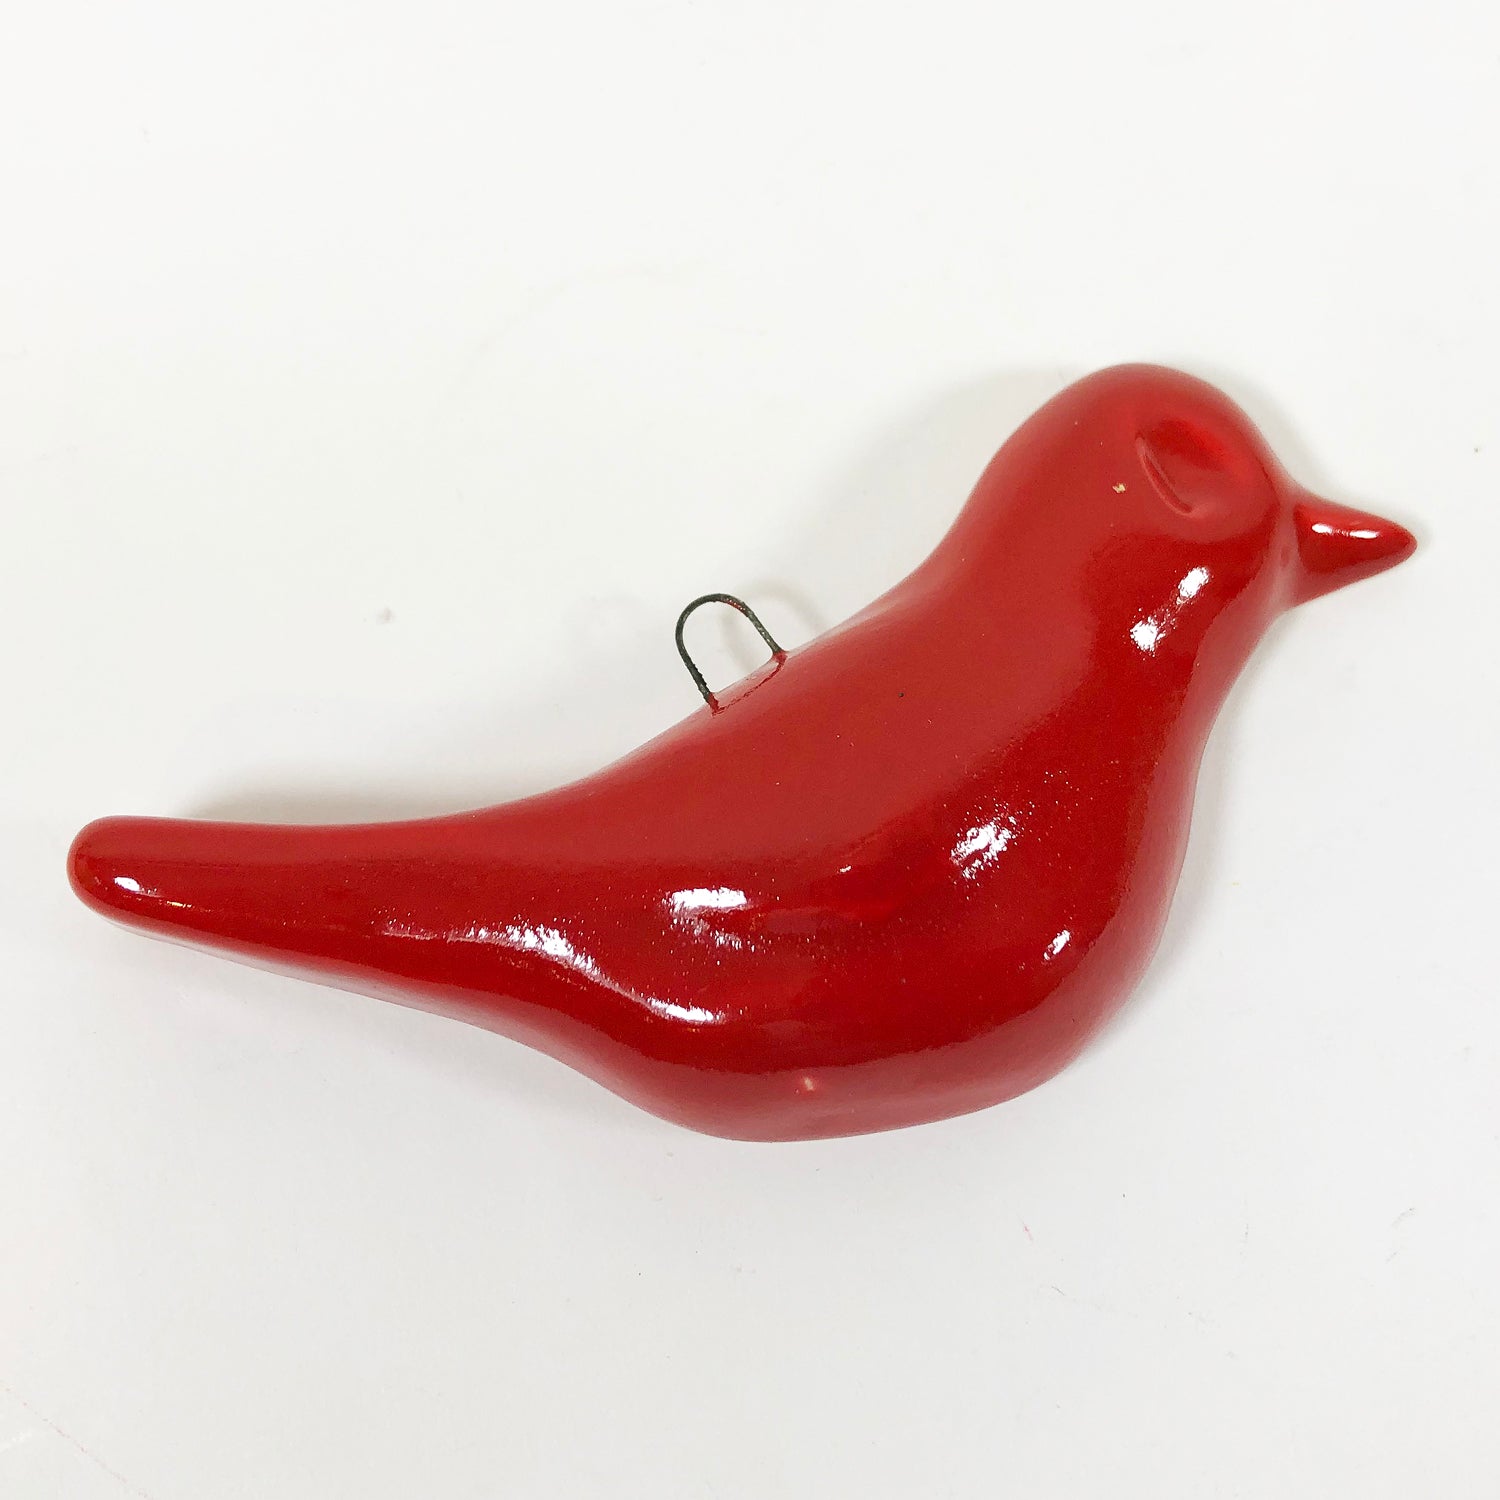 Red Song Bird Ornament